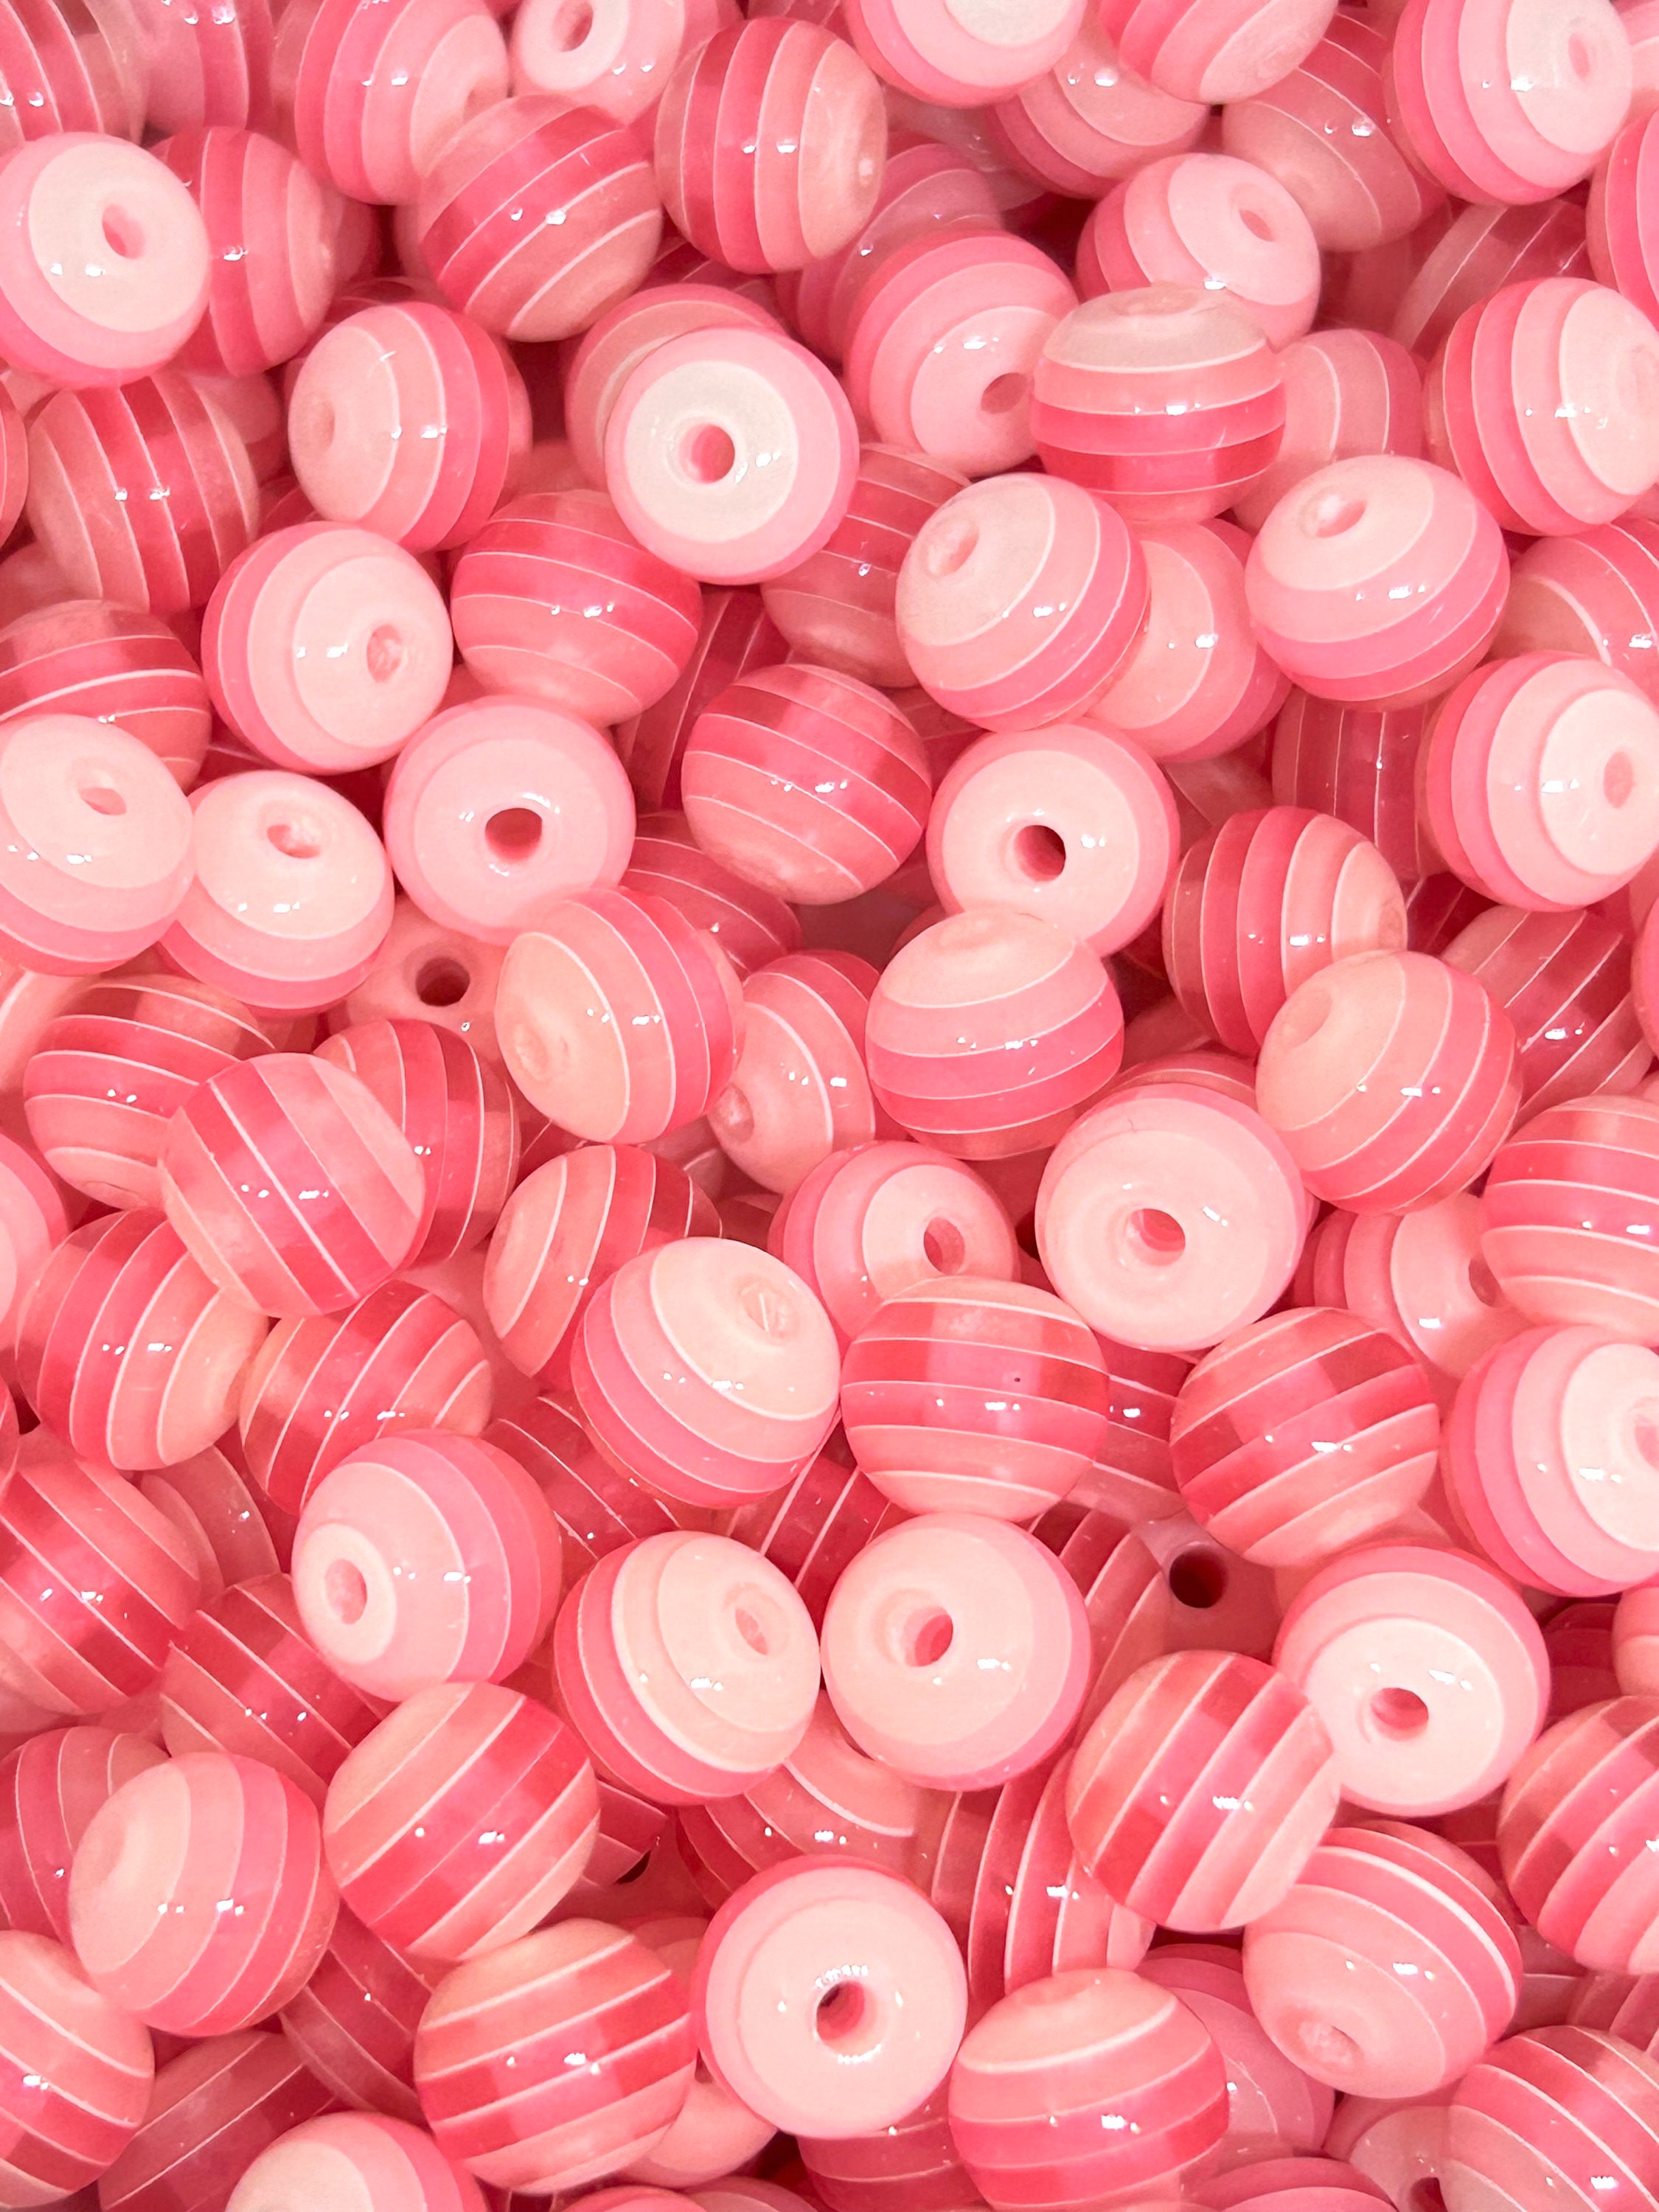 3mm Striped Glass Beads in 10 Colors 1mm Hole Size 650 Pieces Striped Beads  Watermelon Beads Rainbow Stripe Beads Christmas Bead 